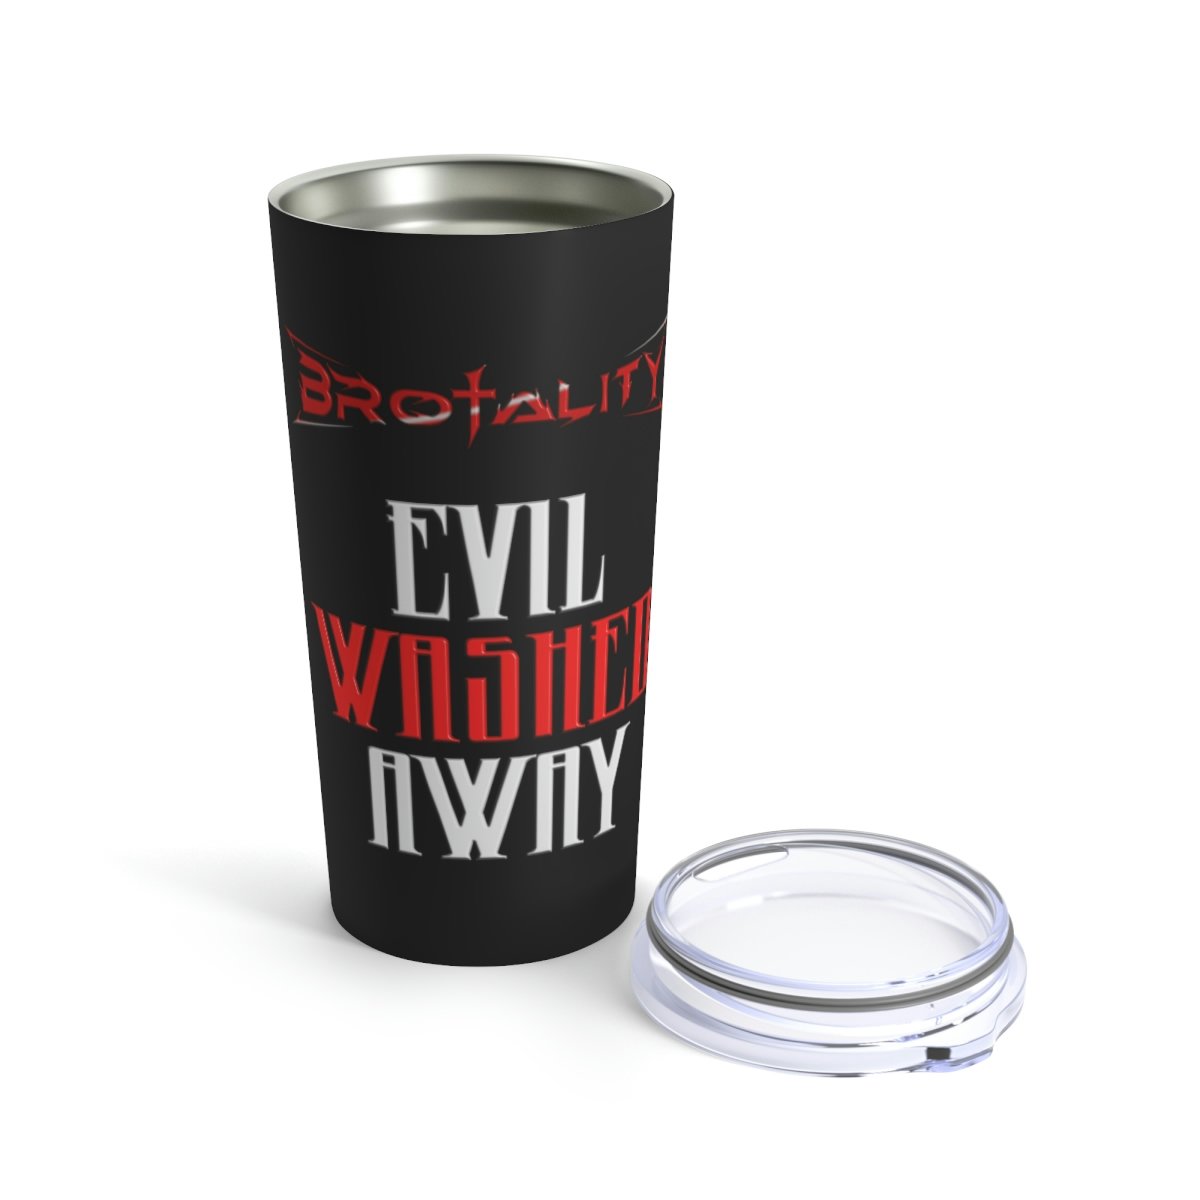 Brotality Evil Washed Away 20oz Tumbler